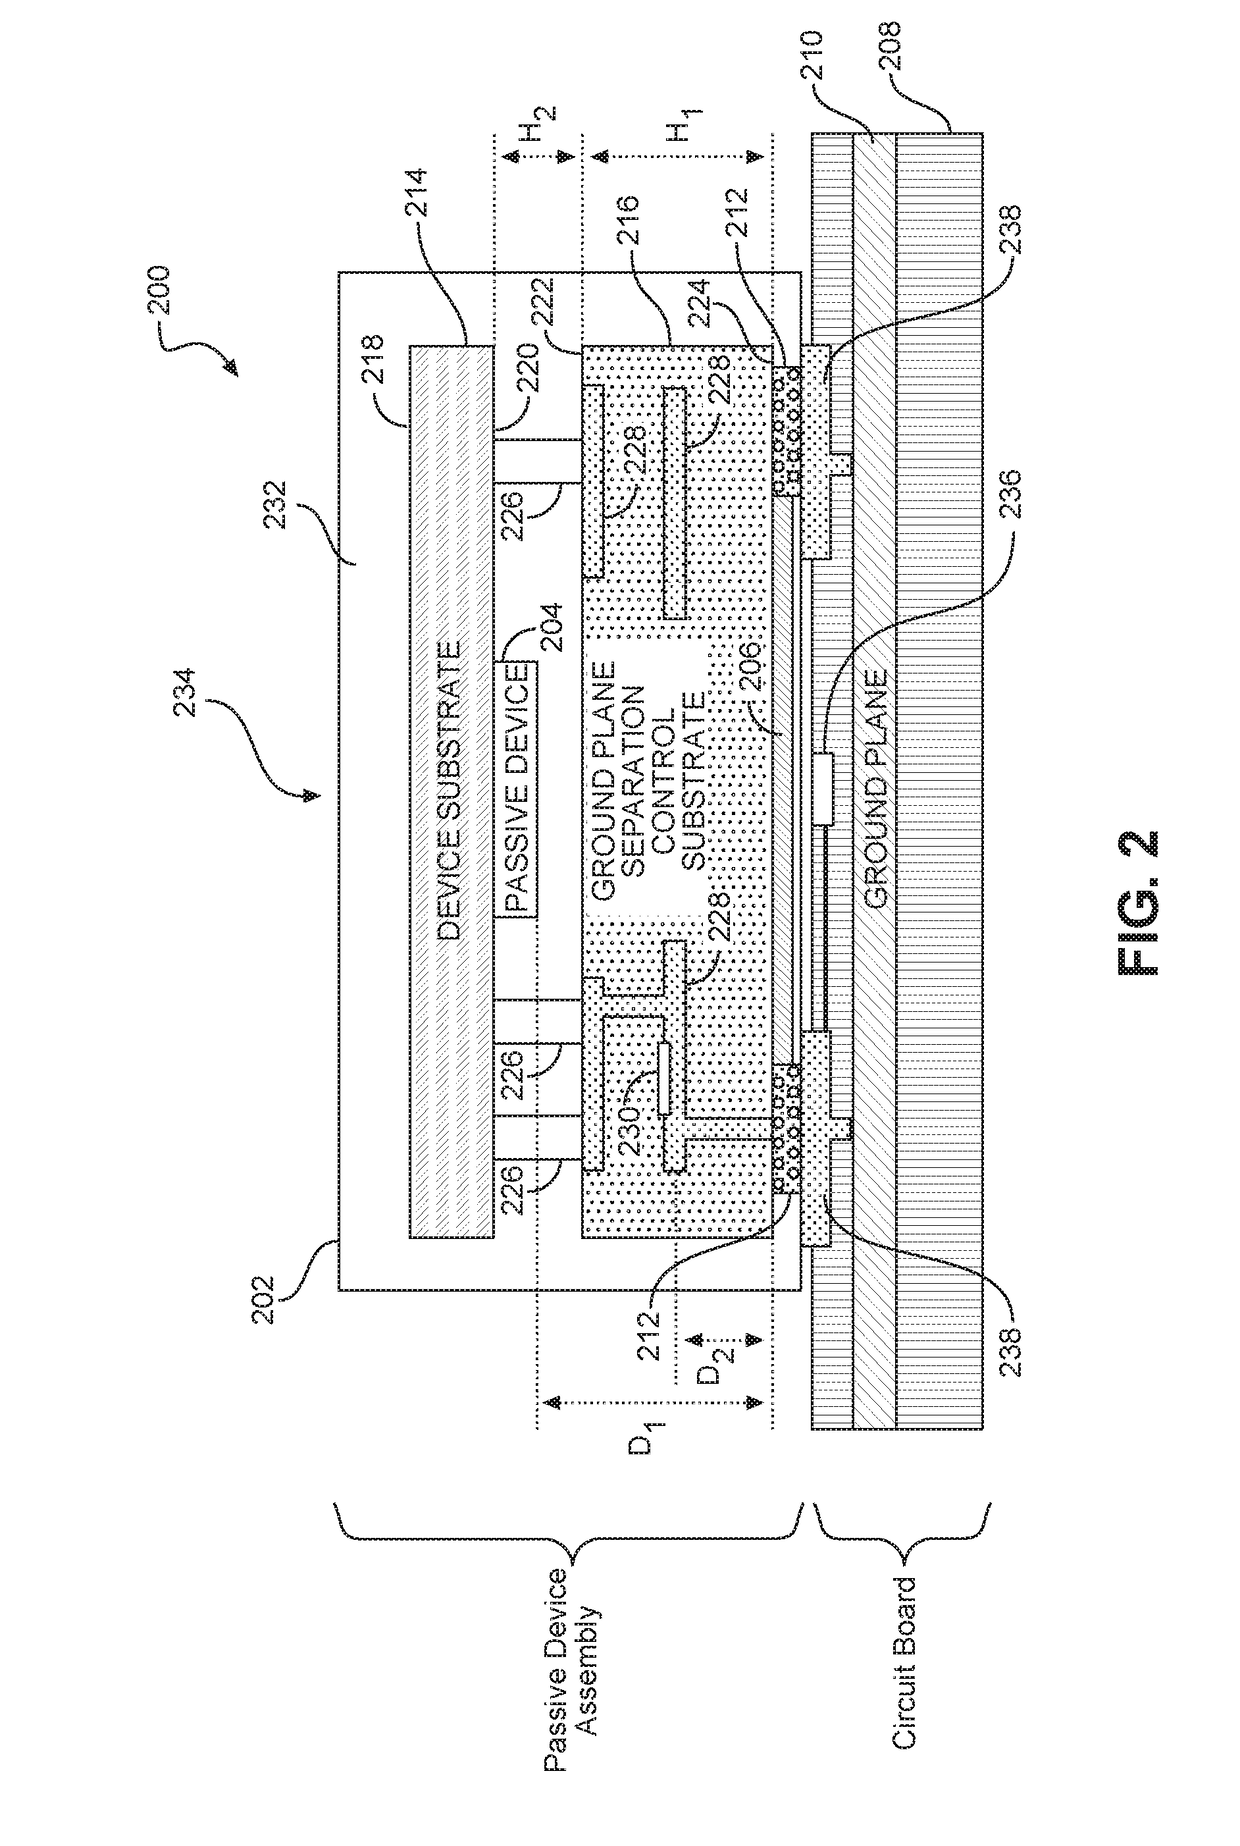 Passive device assembly for accurate ground plane control